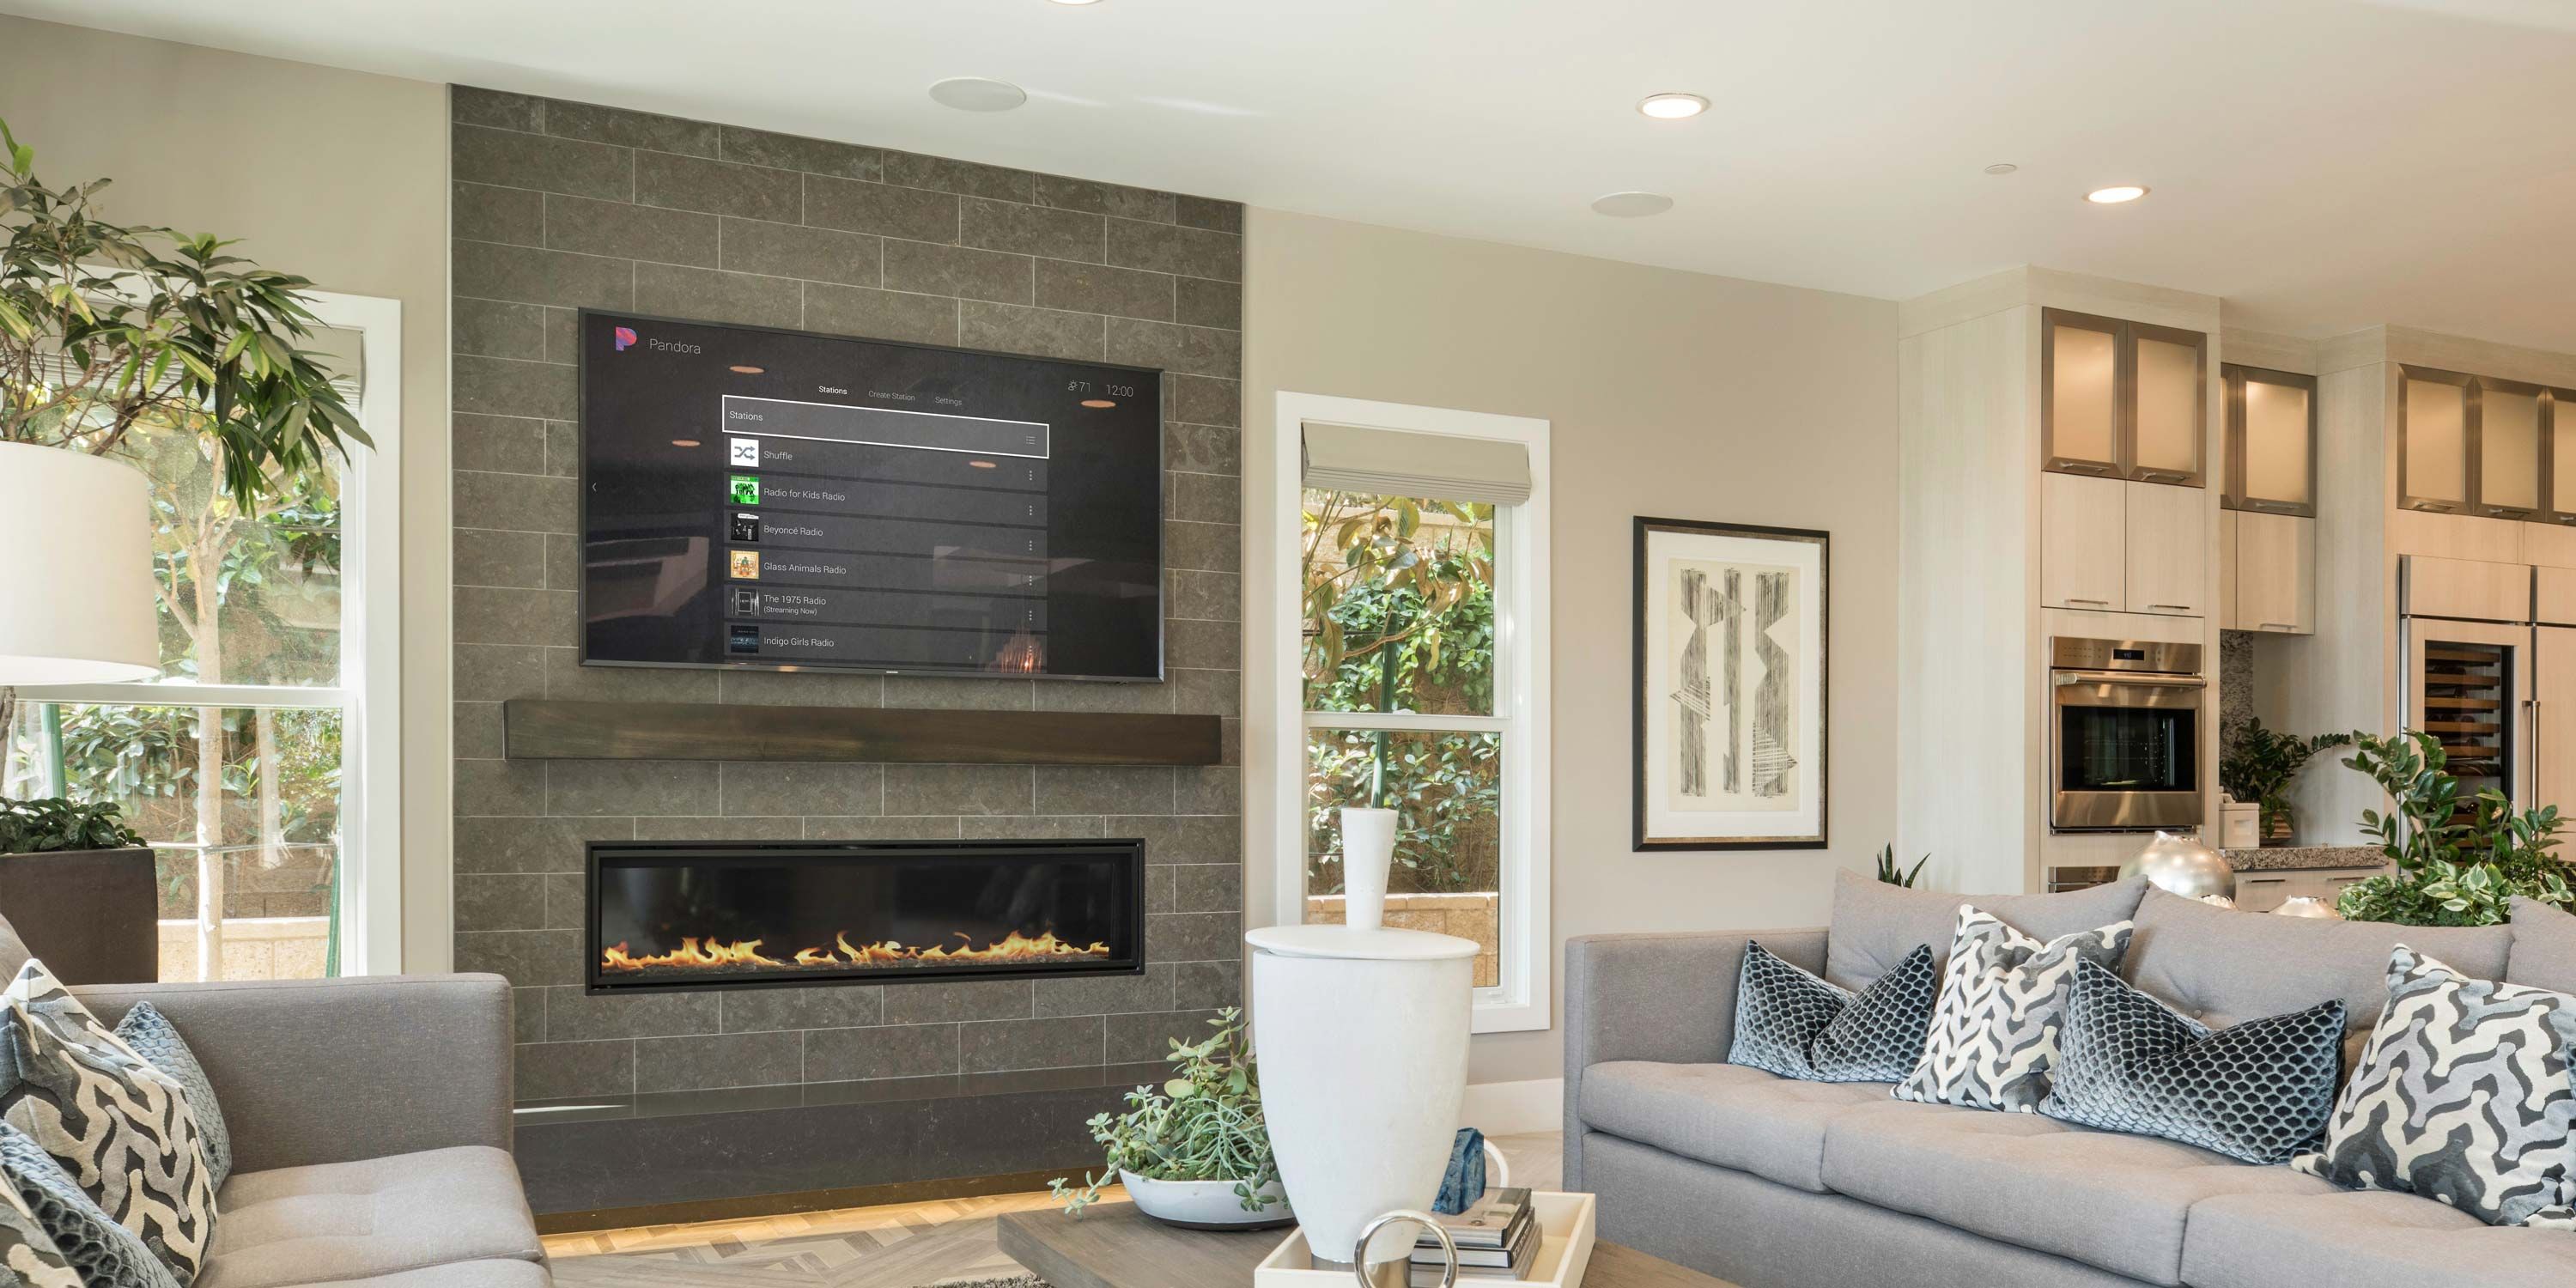 control4 technology in a family room